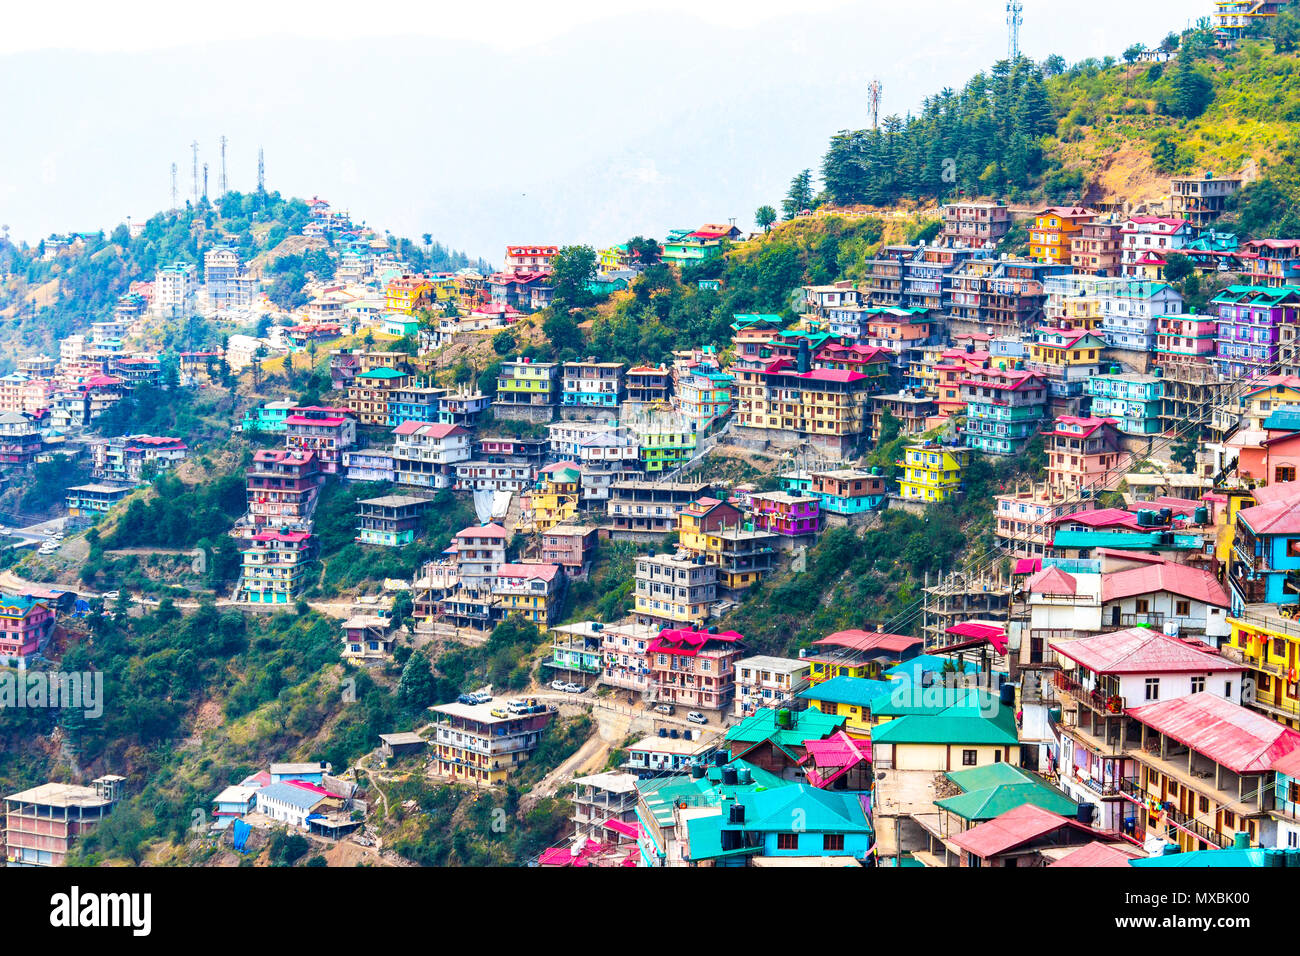 Not Brazil Nor Argentina Its my India. The beautiful landscape of Shimla situated in Himachal Pradesh. Stock Photo